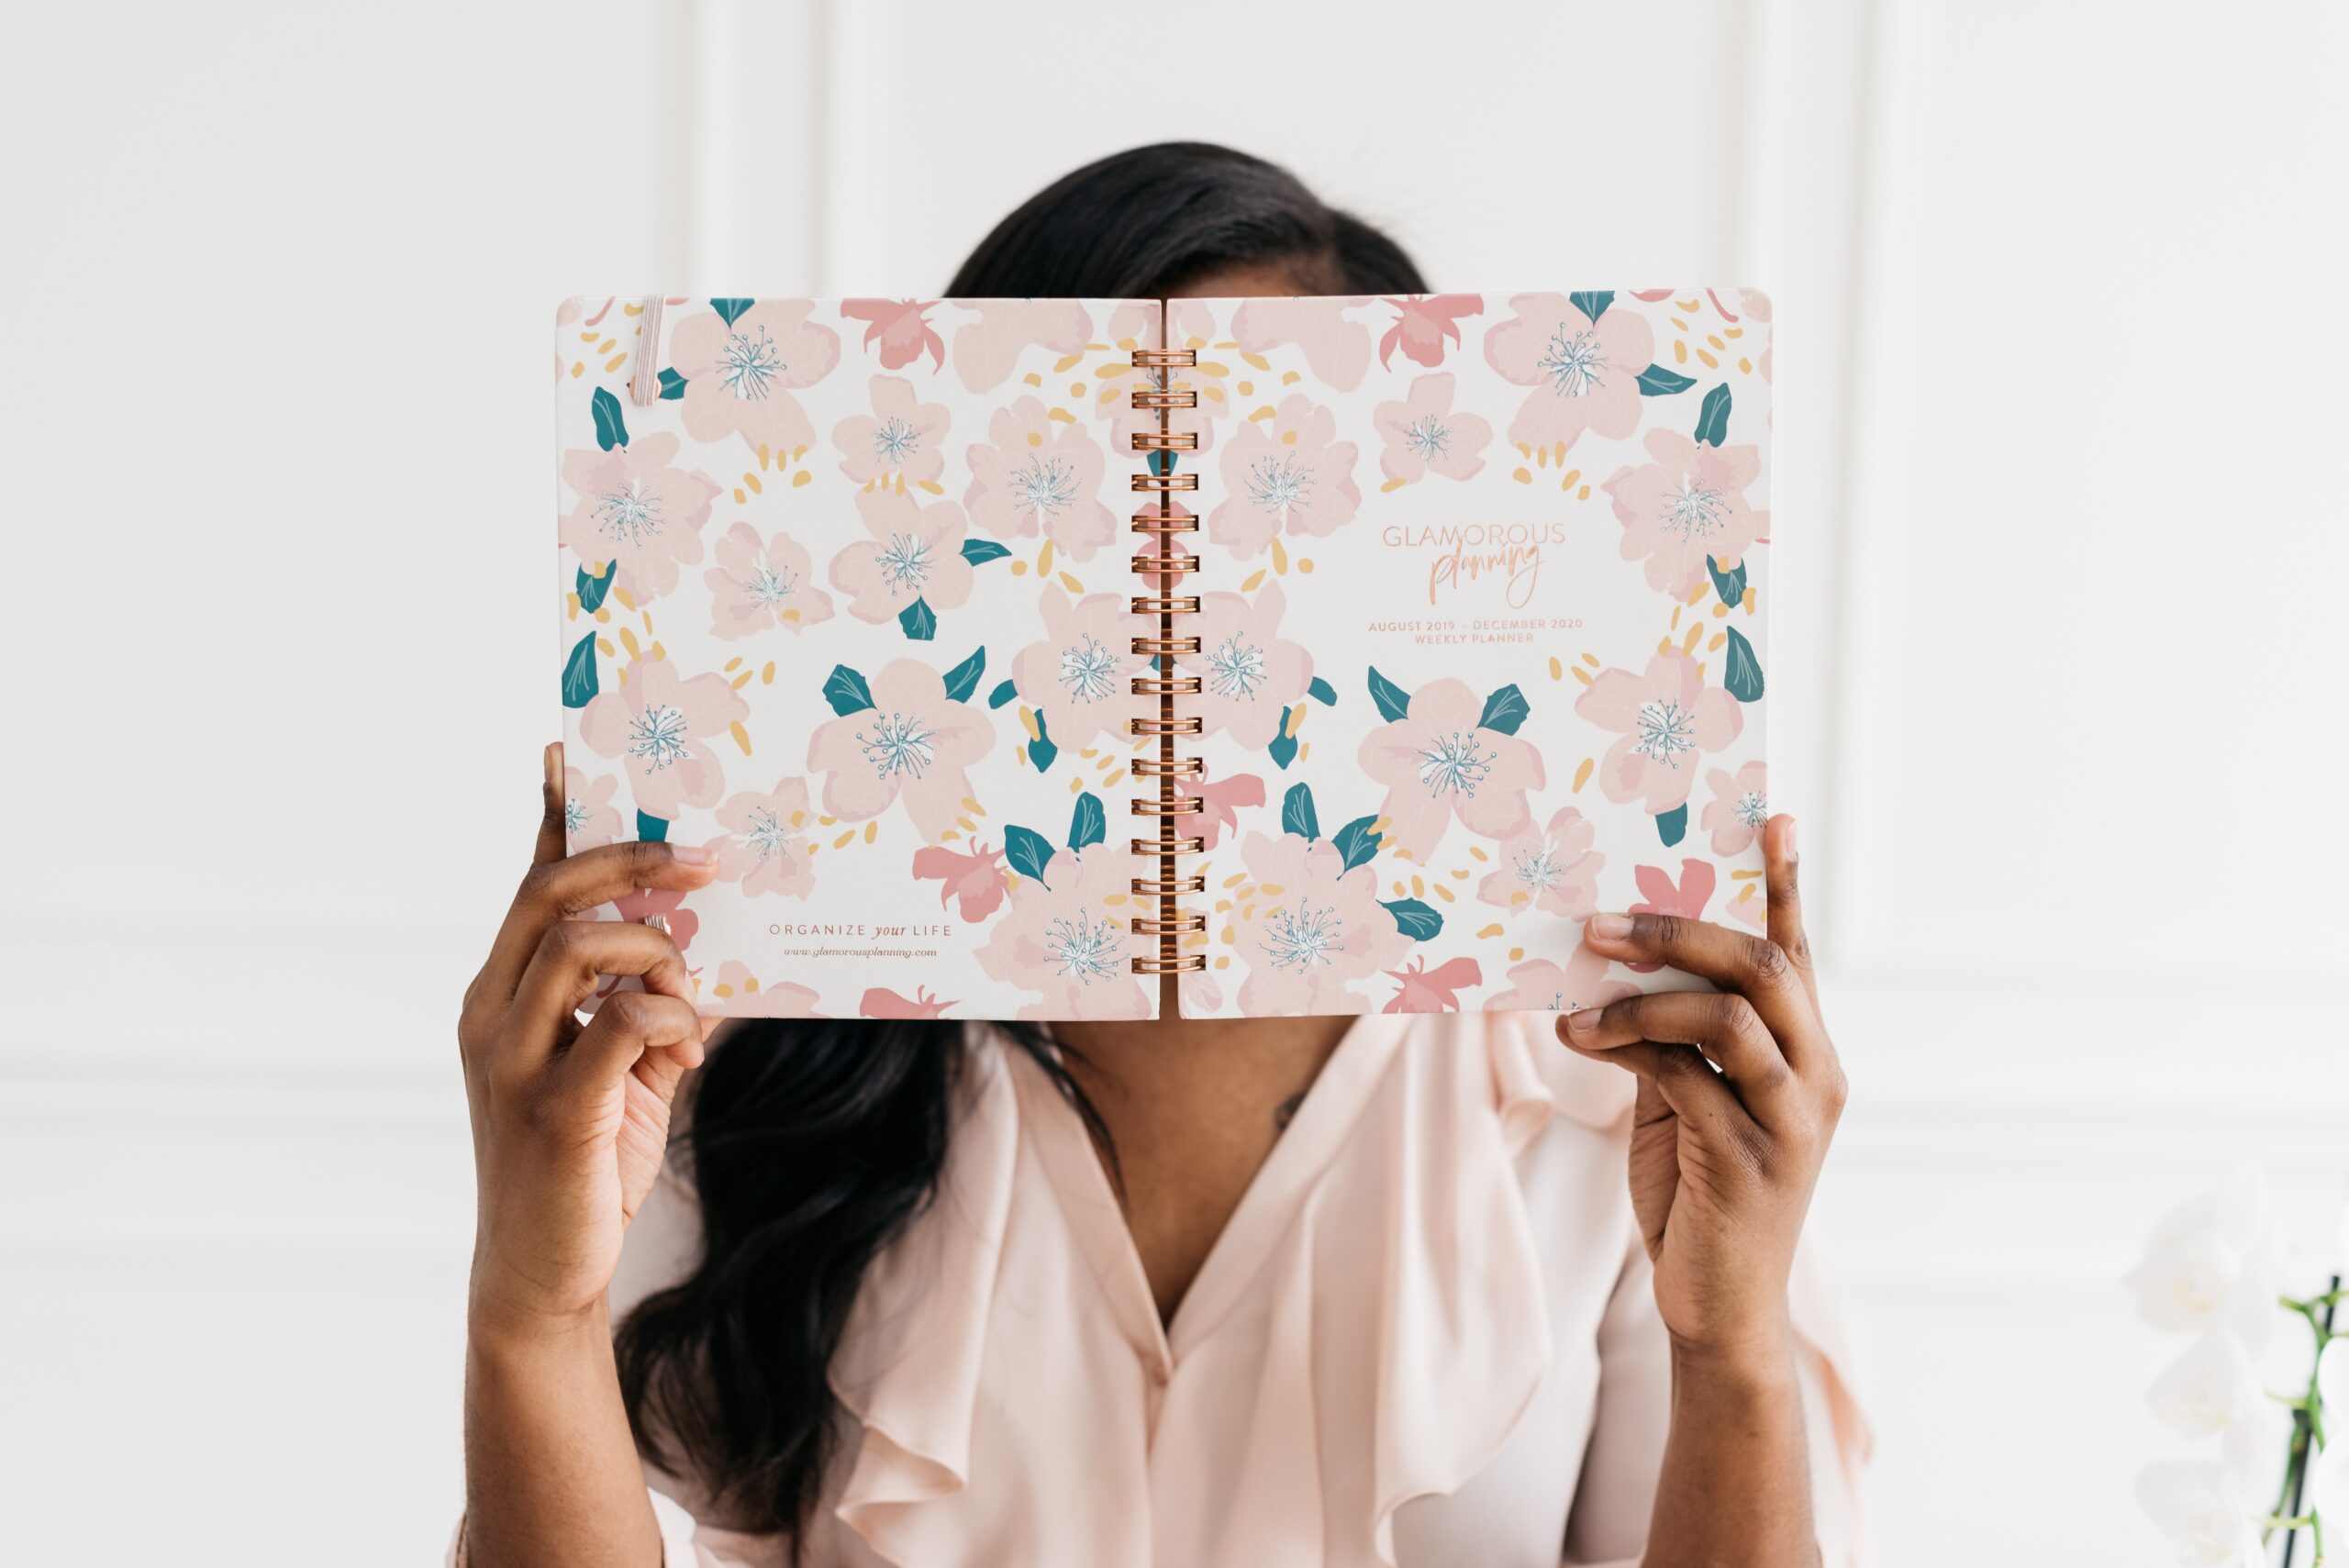 woman holding a planner - how to create new habits